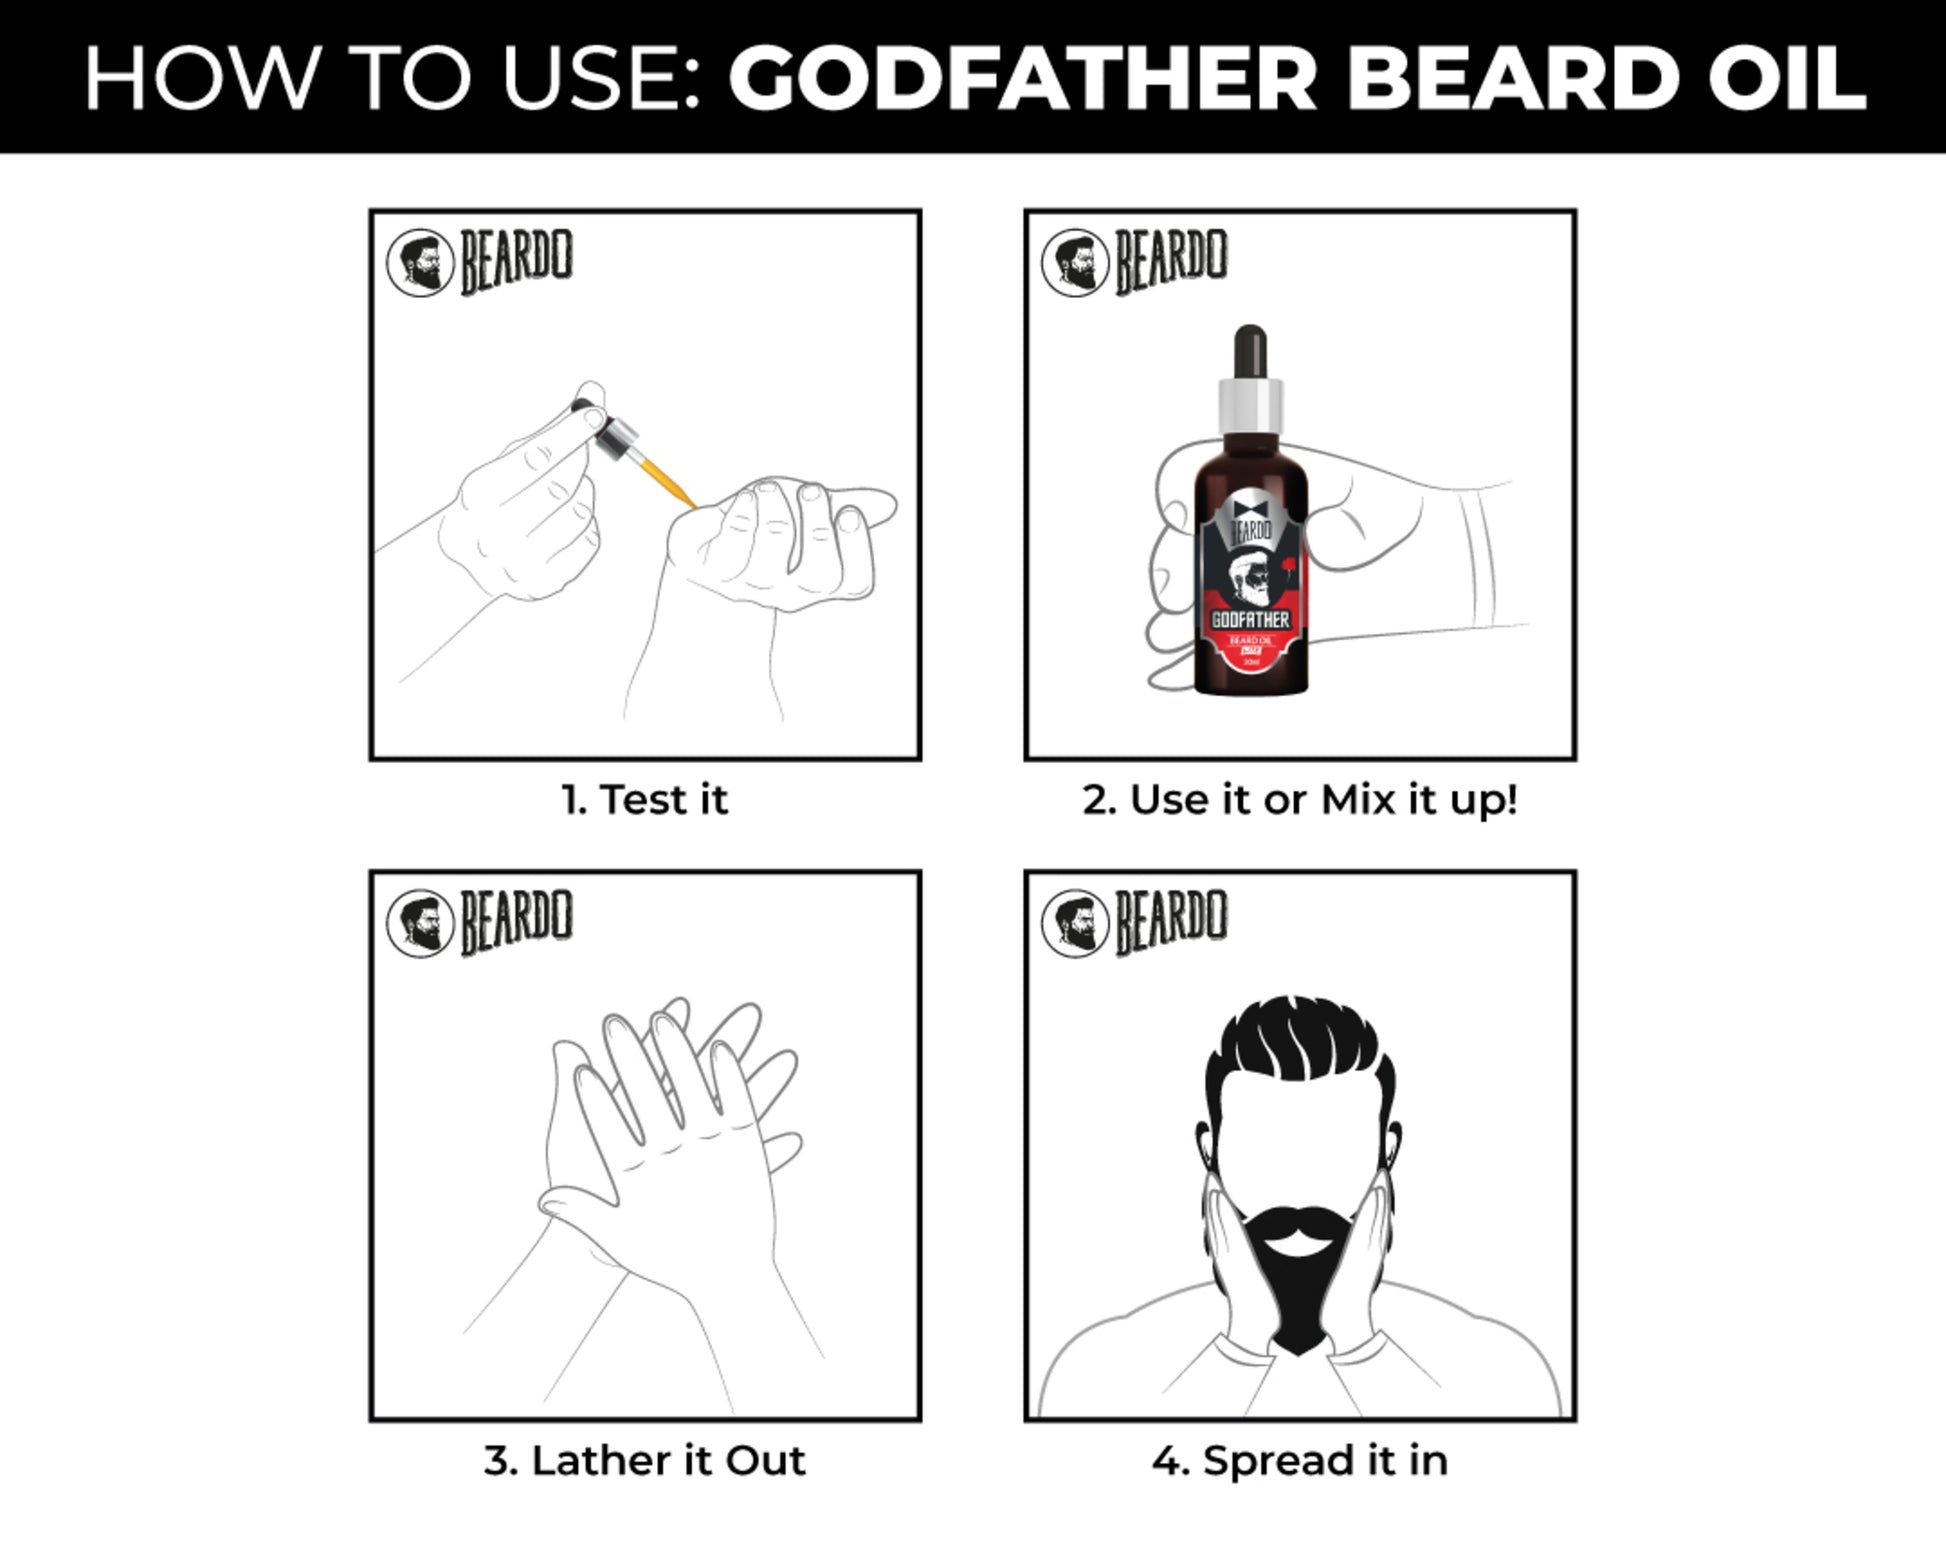 How to use godfather beard oil